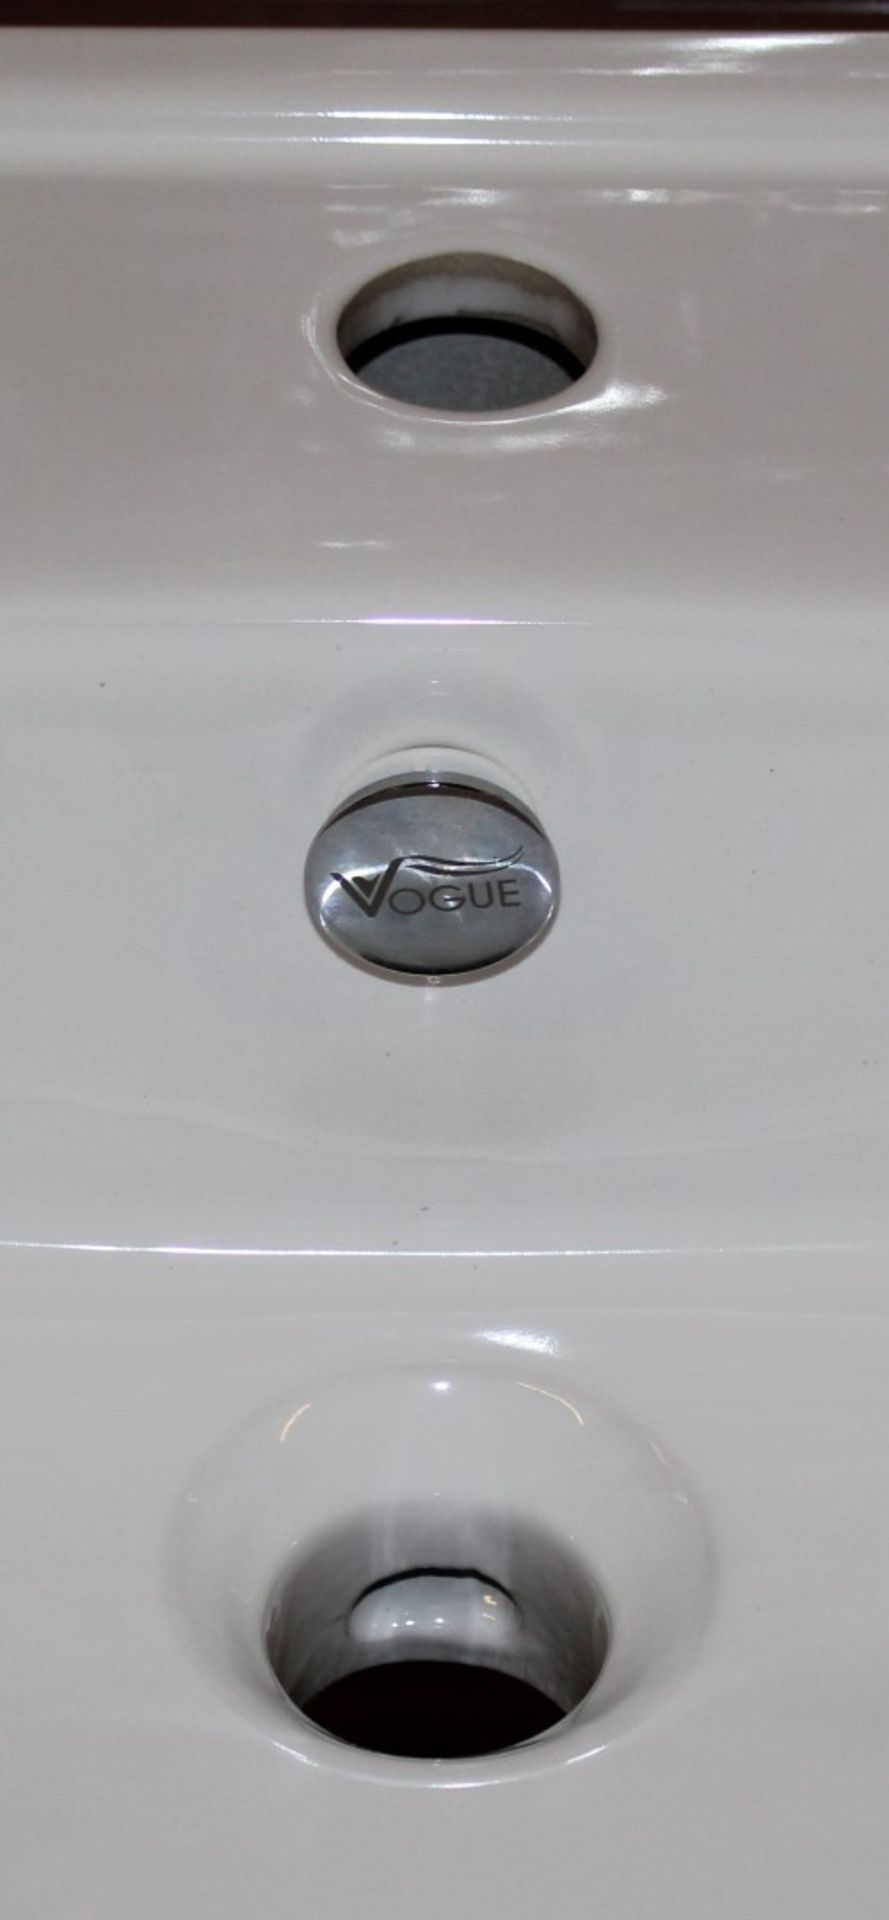 4 x Vogue Bathrooms OPTIONS Single Tap Hole SINK BASINS With Pedestals - 580mm Width - Brand New - Image 7 of 7